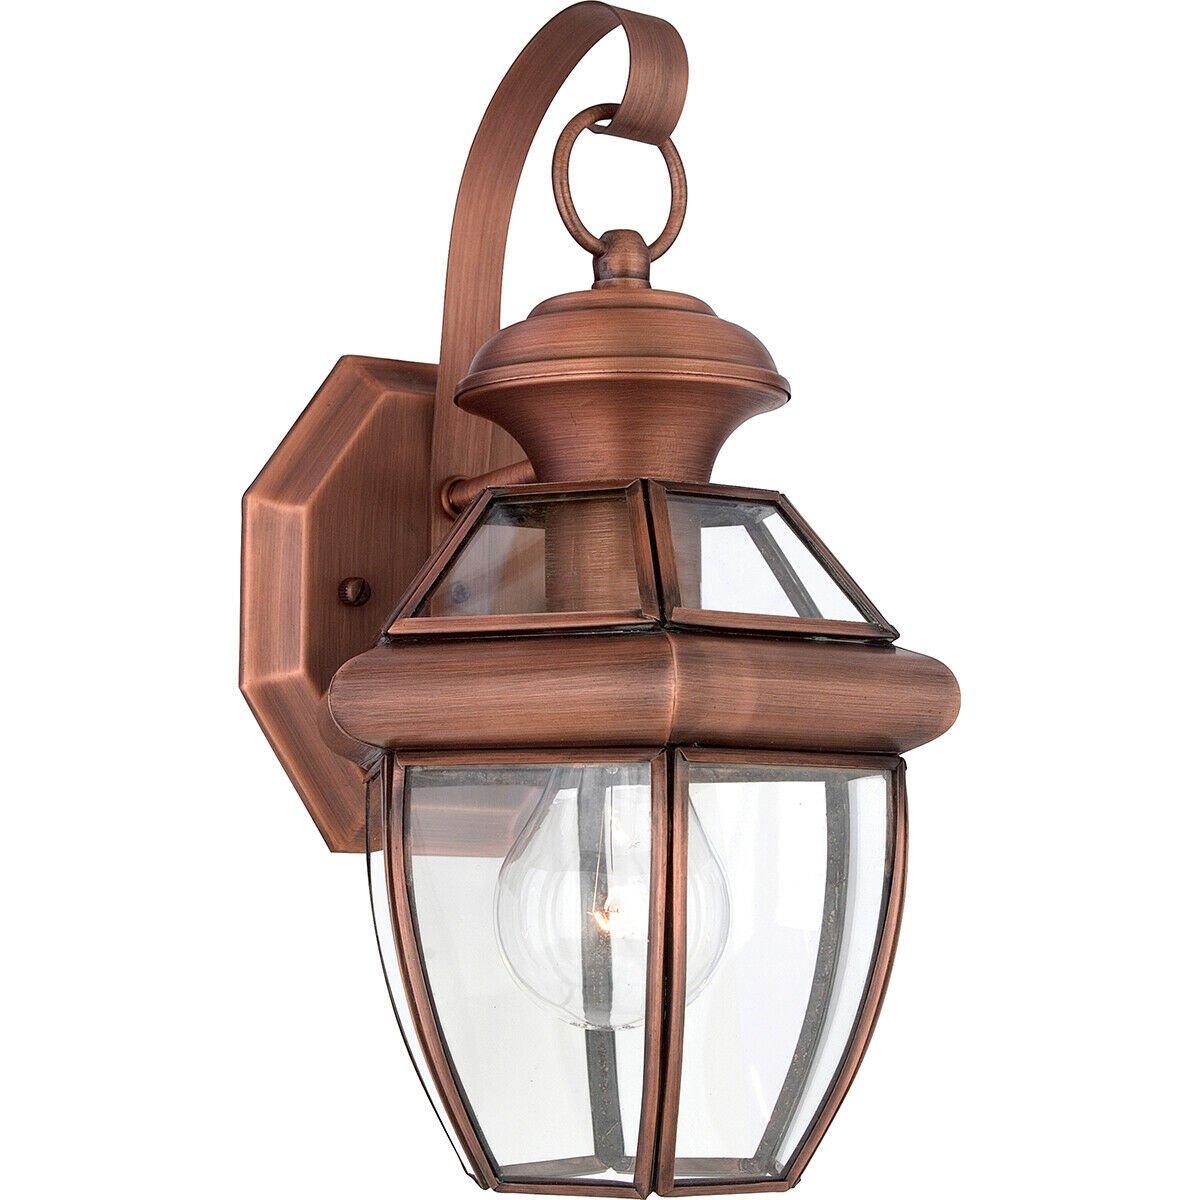 Outdoor IP44 Wall Light Sconce Aged Copper LED E27 60W Bulb Outside External